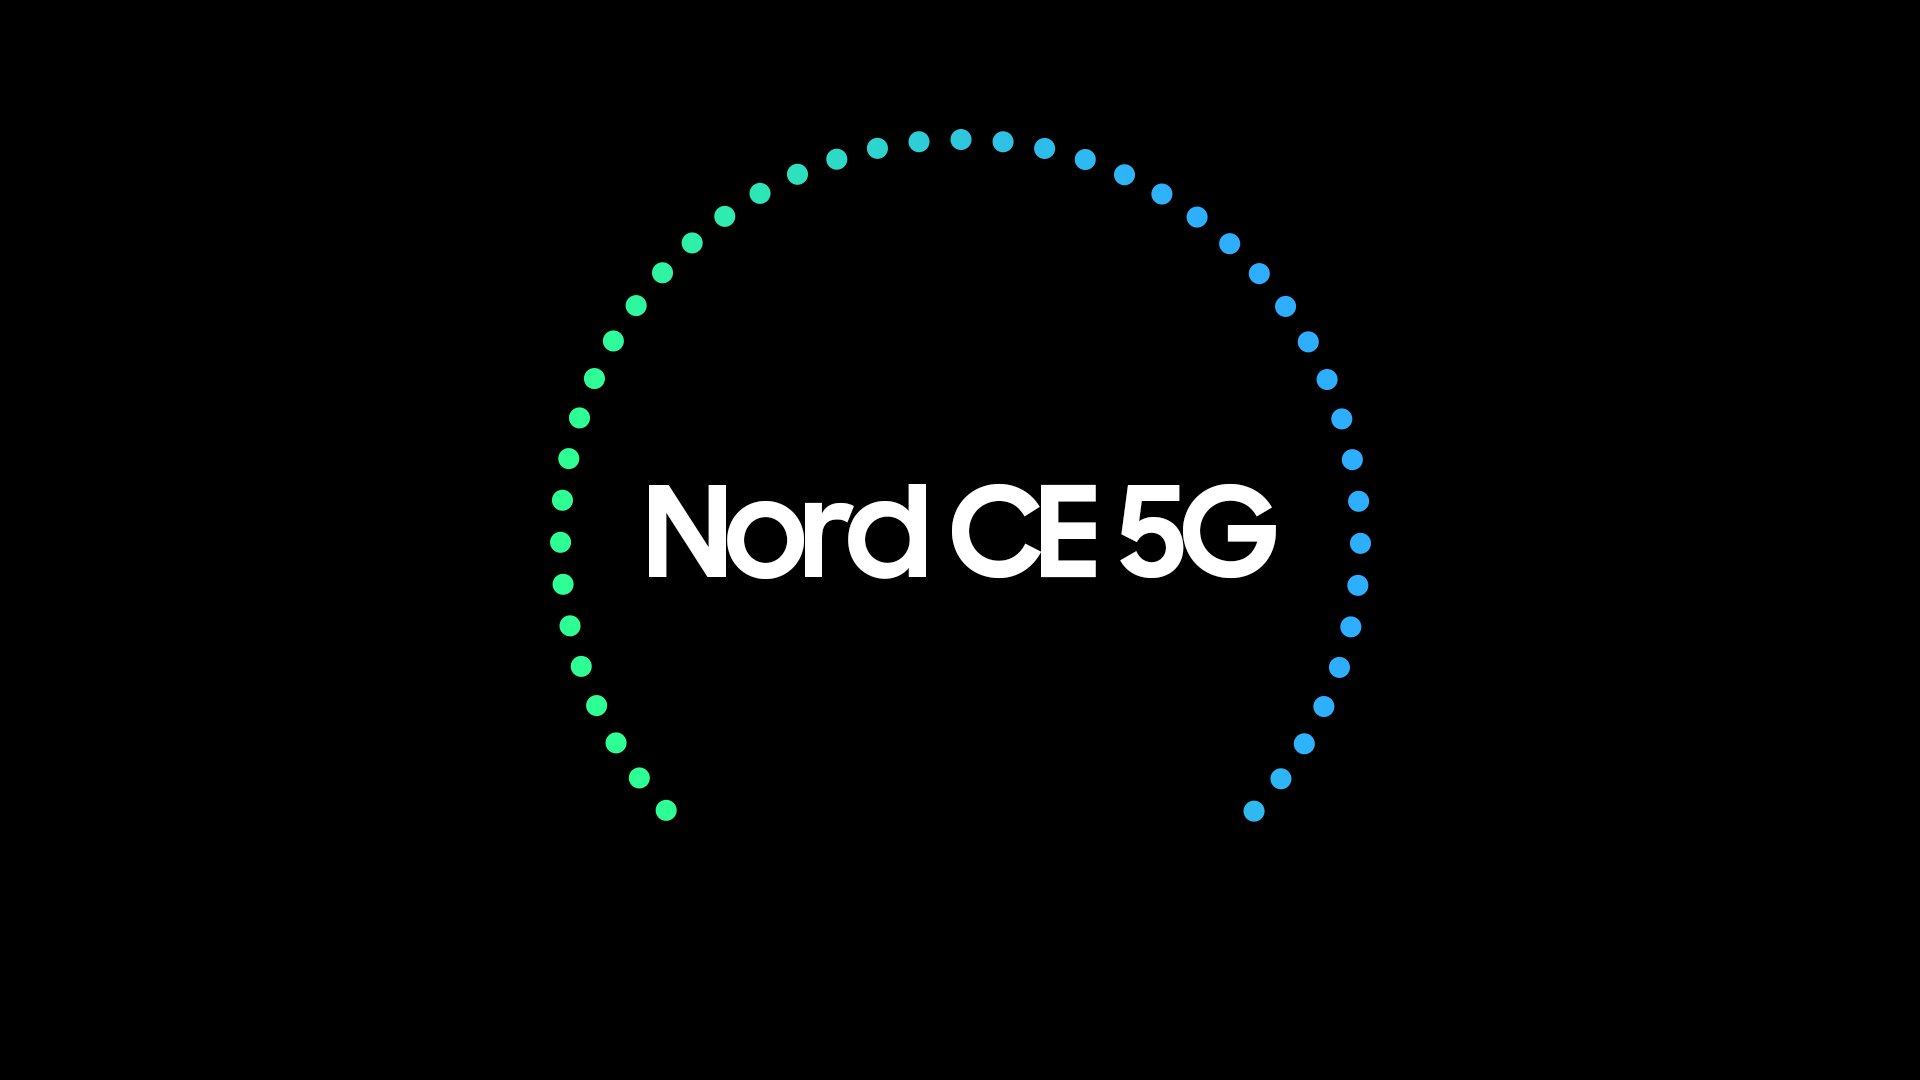 OnePlus Nord CE 5G tipped, could be the successor of the Nord N10 5G